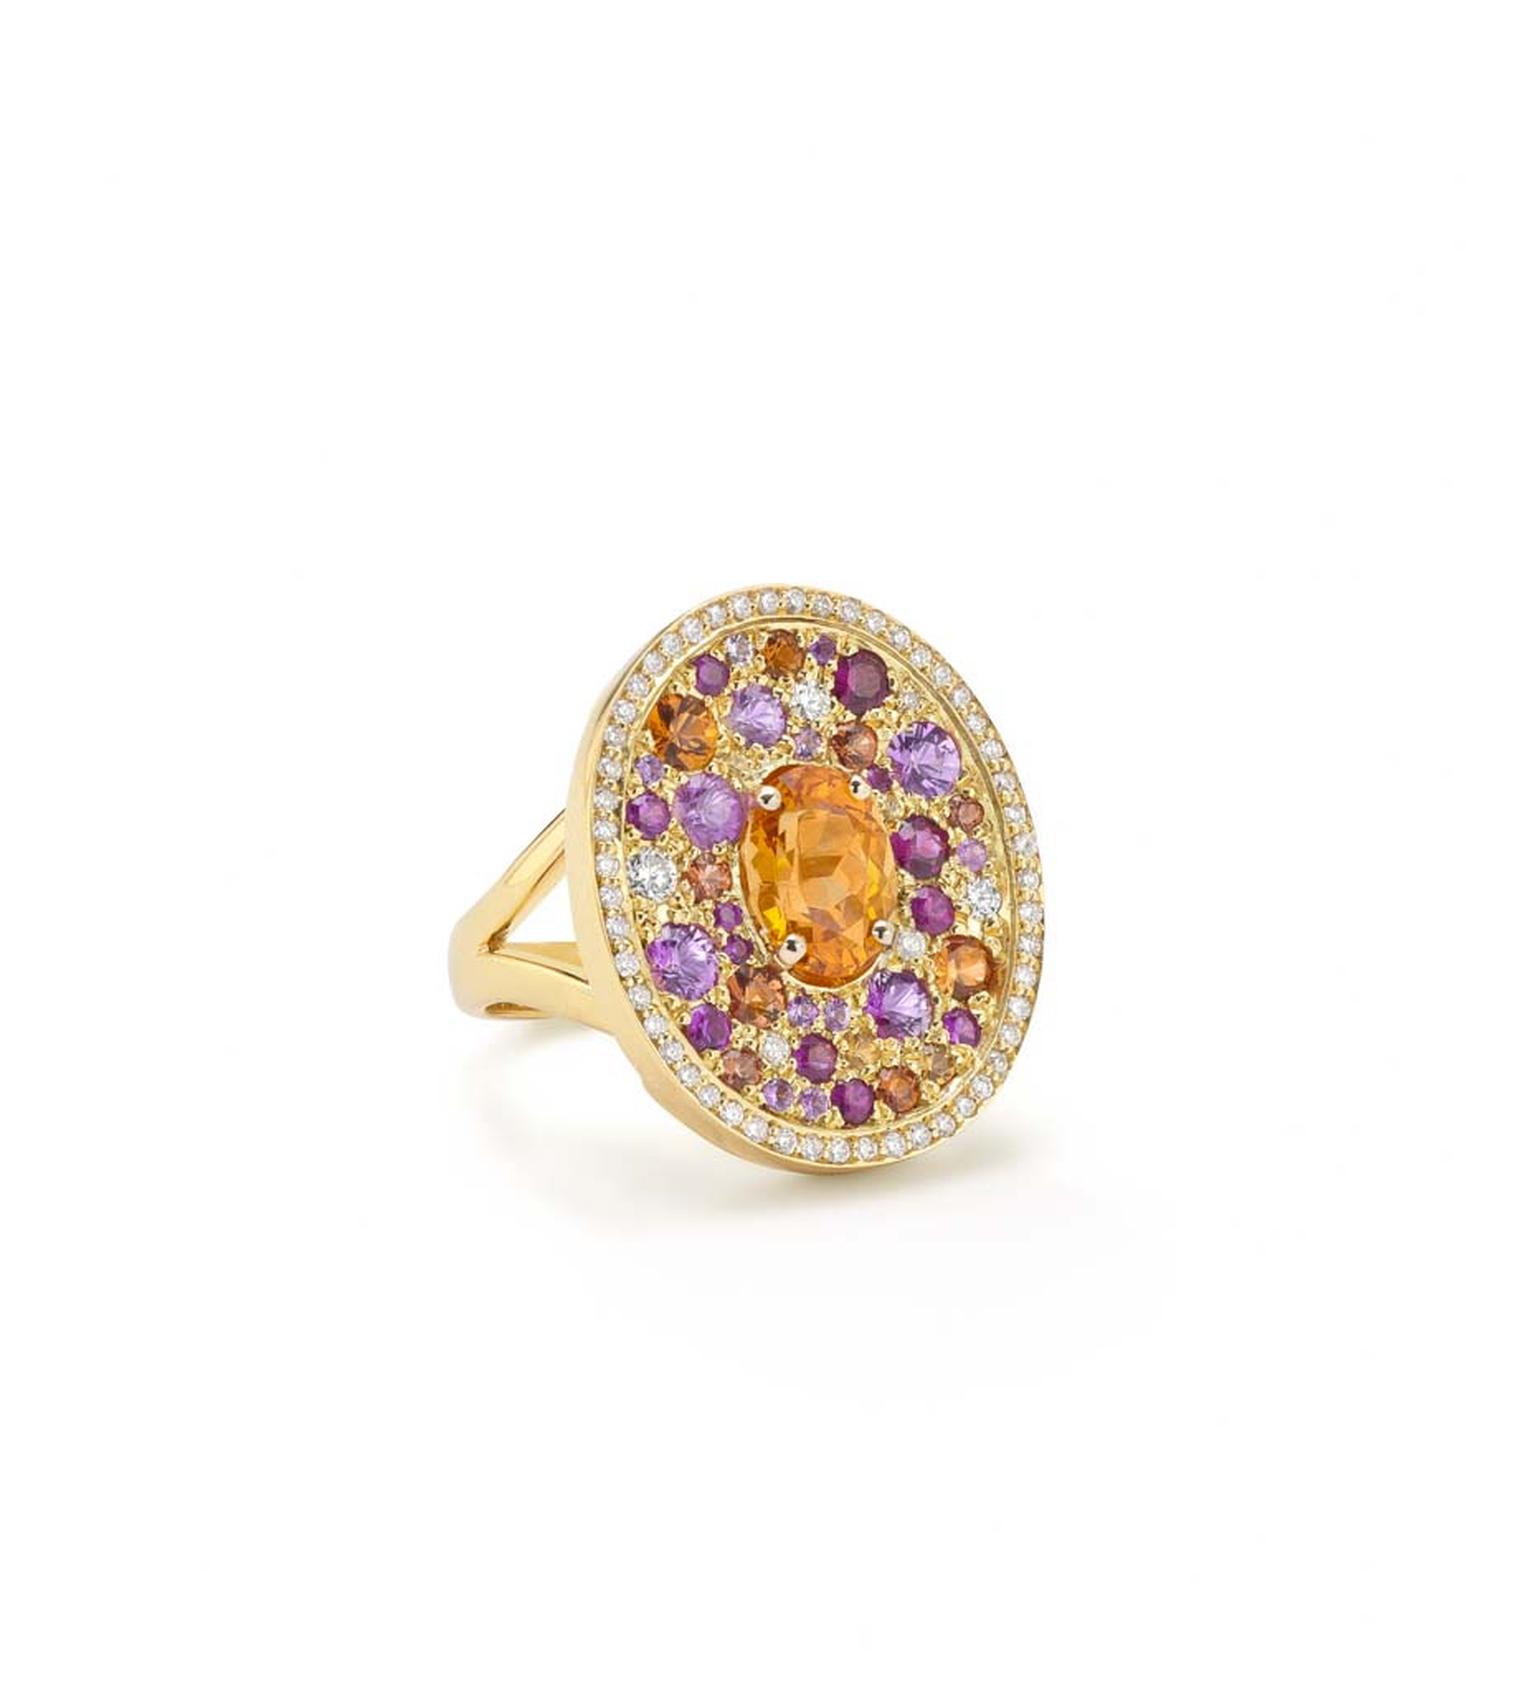 Robinson Pelham white gold Volcano Asteroid ring featuring a central oval mandarin garnet surrounded by a pave of diamonds, rubies and yellow, orange and pink sapphires.